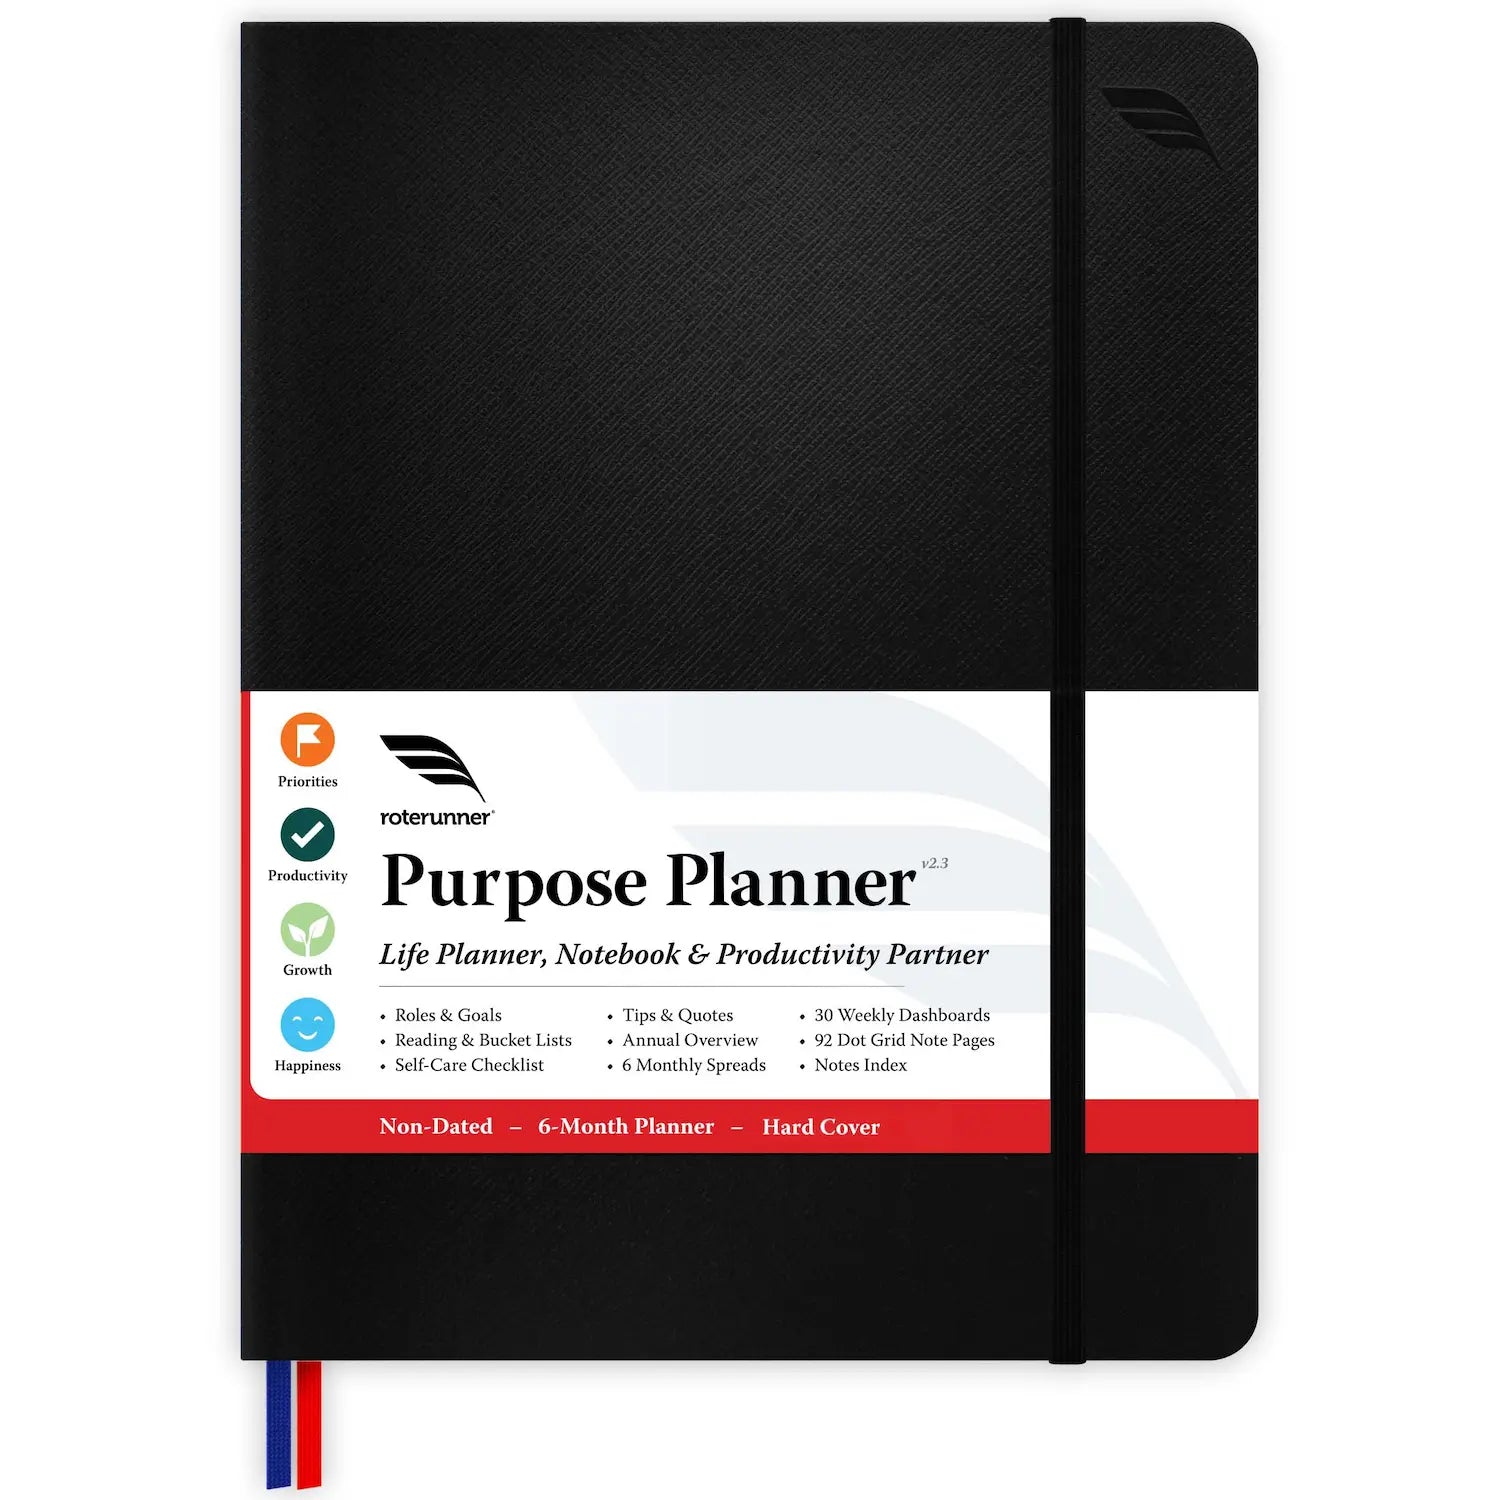 Simplified To Do List Planner Notebook - Easily Organize Your Daily Tasks  And Meetings at Work - The Perfect Daily Journal And Undated Office  Supplies Checklist For Women 